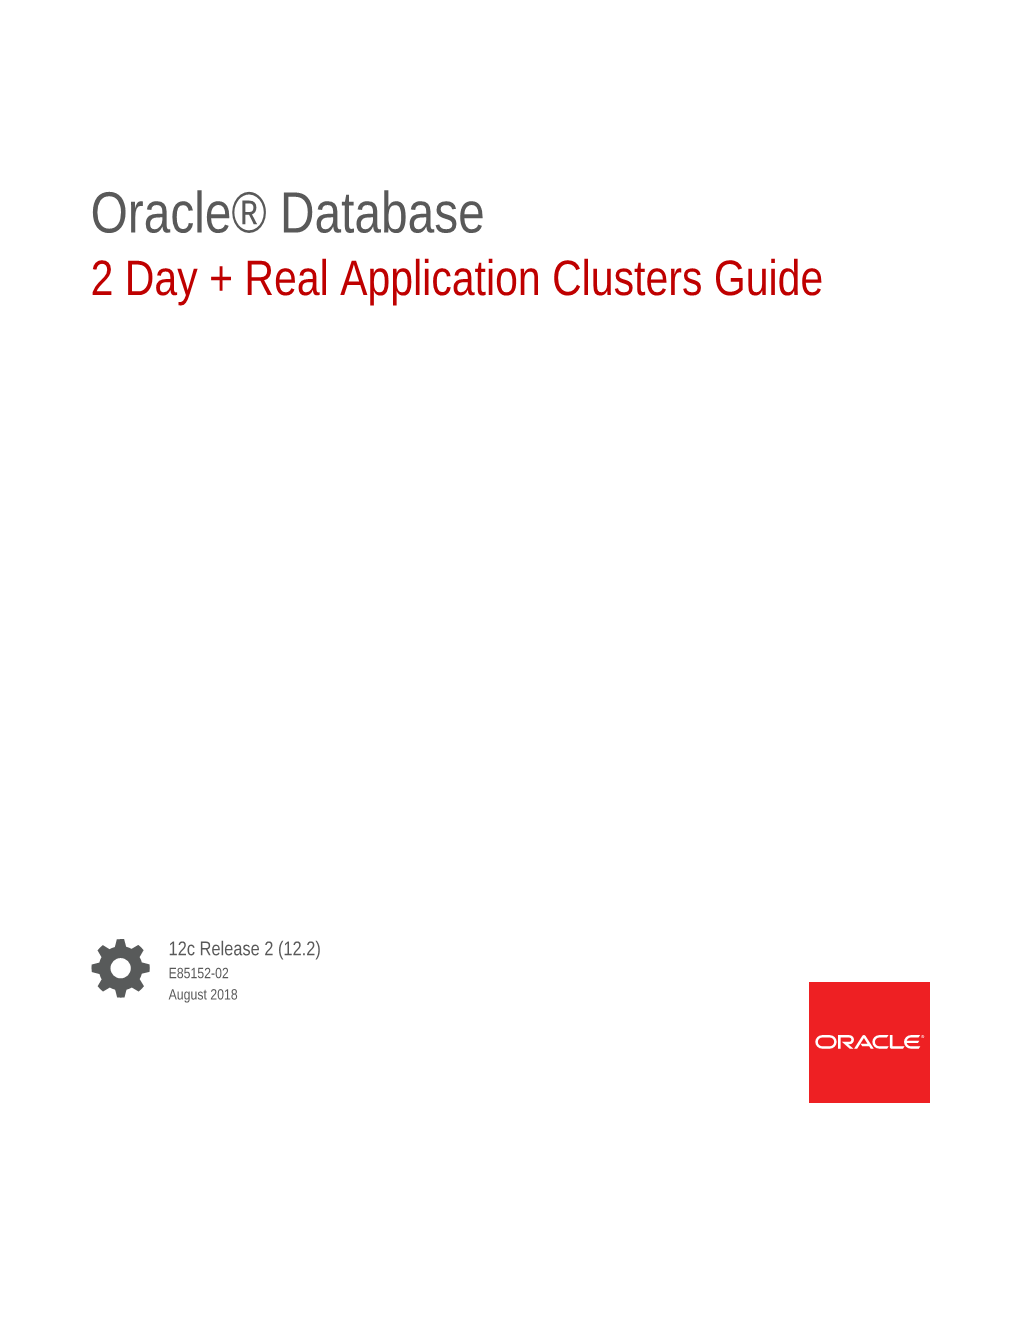 Oracle® Database 2 Day + Real Application Clusters Guide